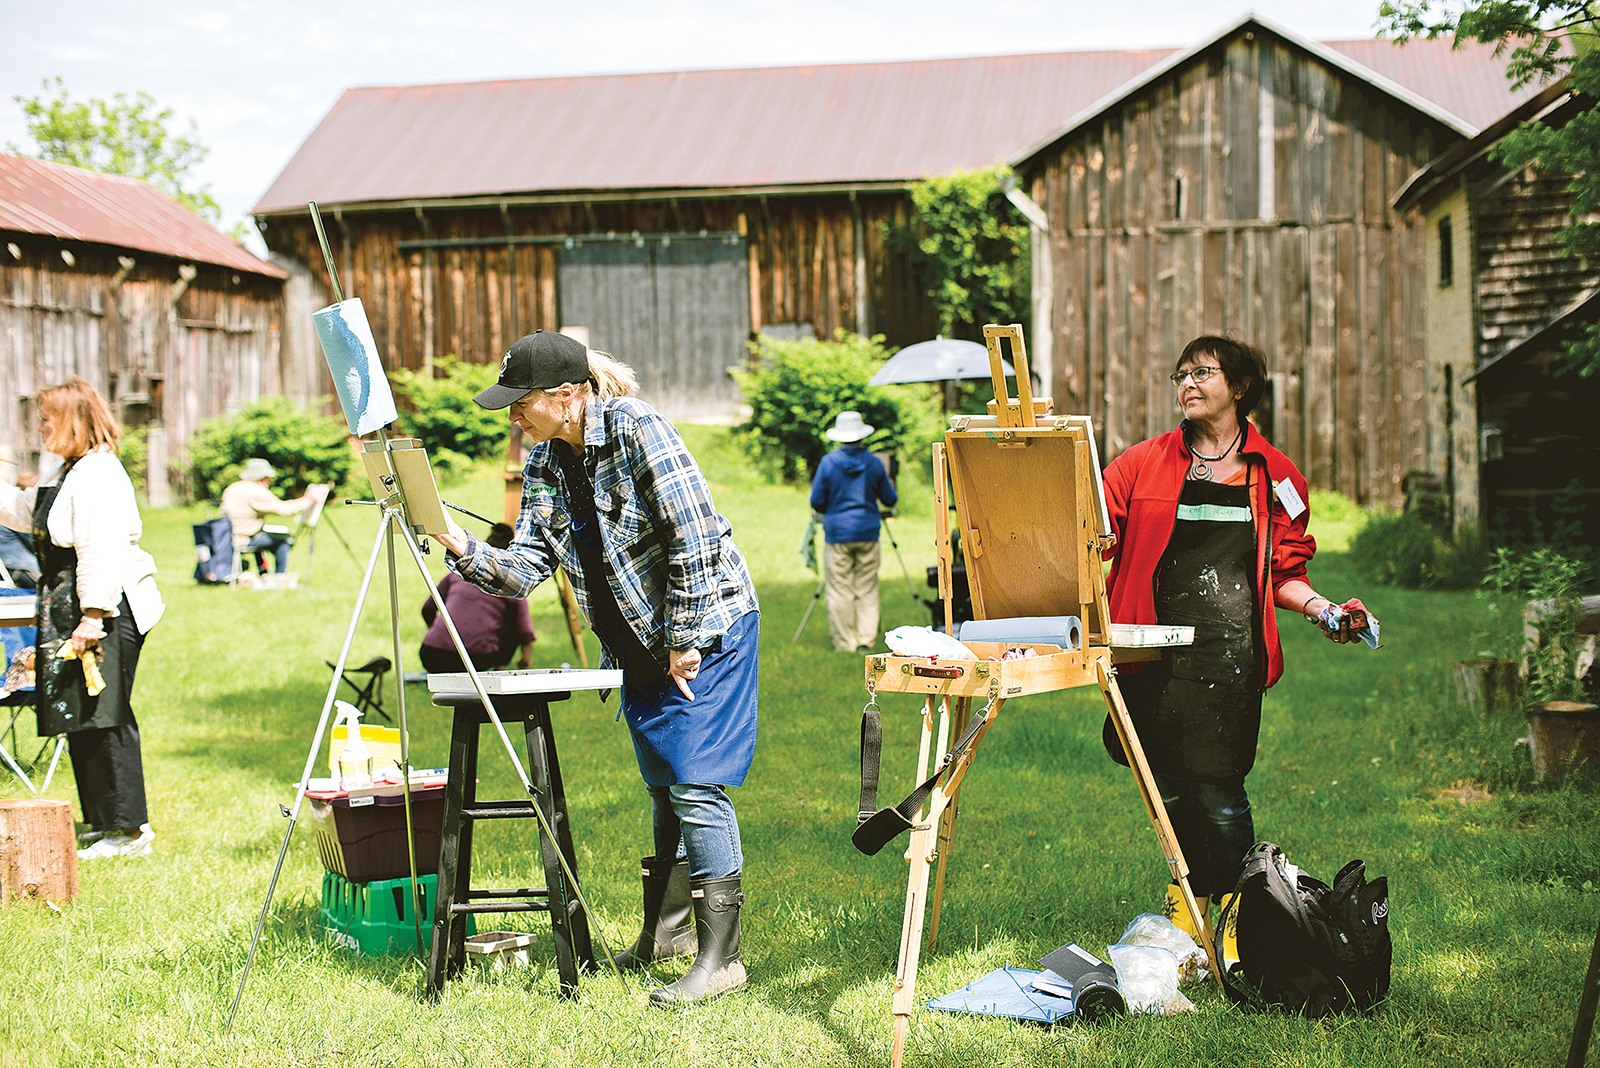 enjoy a class ‘en plein air’ offered by the Blue Mountain School of Landscape Painting.